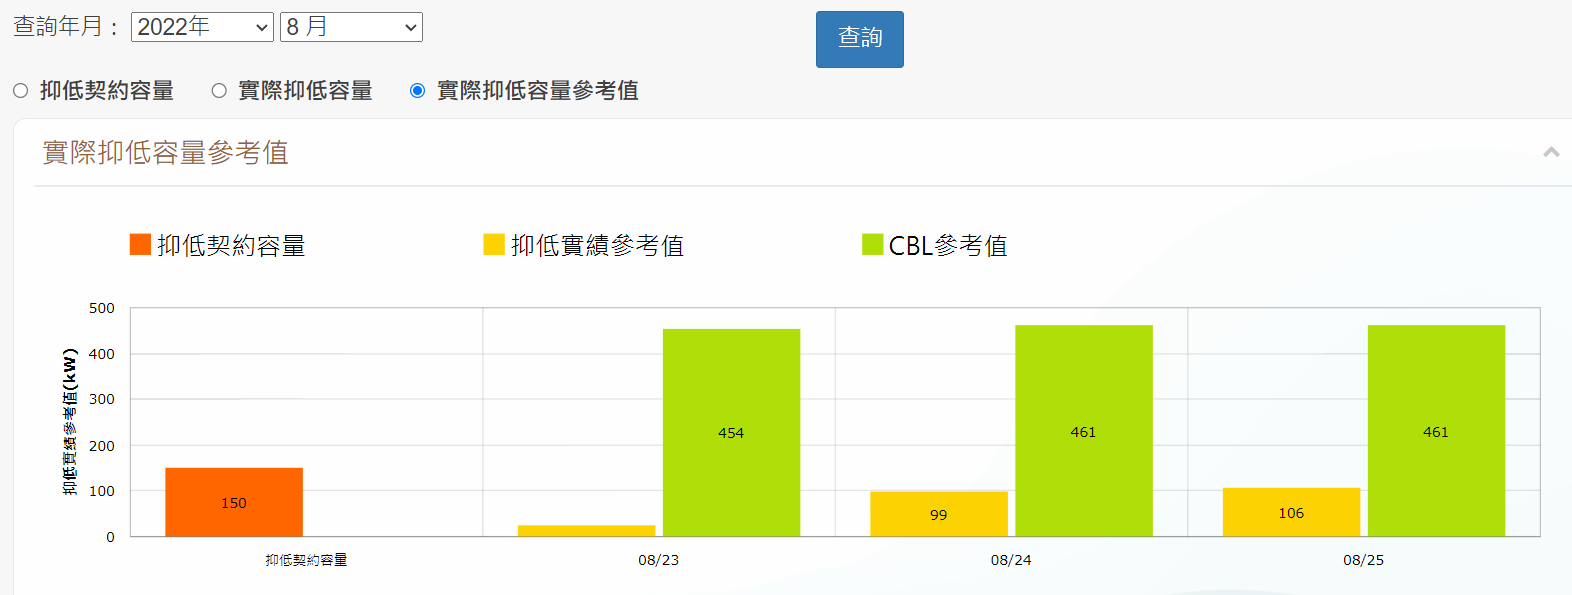 Figure 5. Reduction data from Taipower Company’s demand bidding website